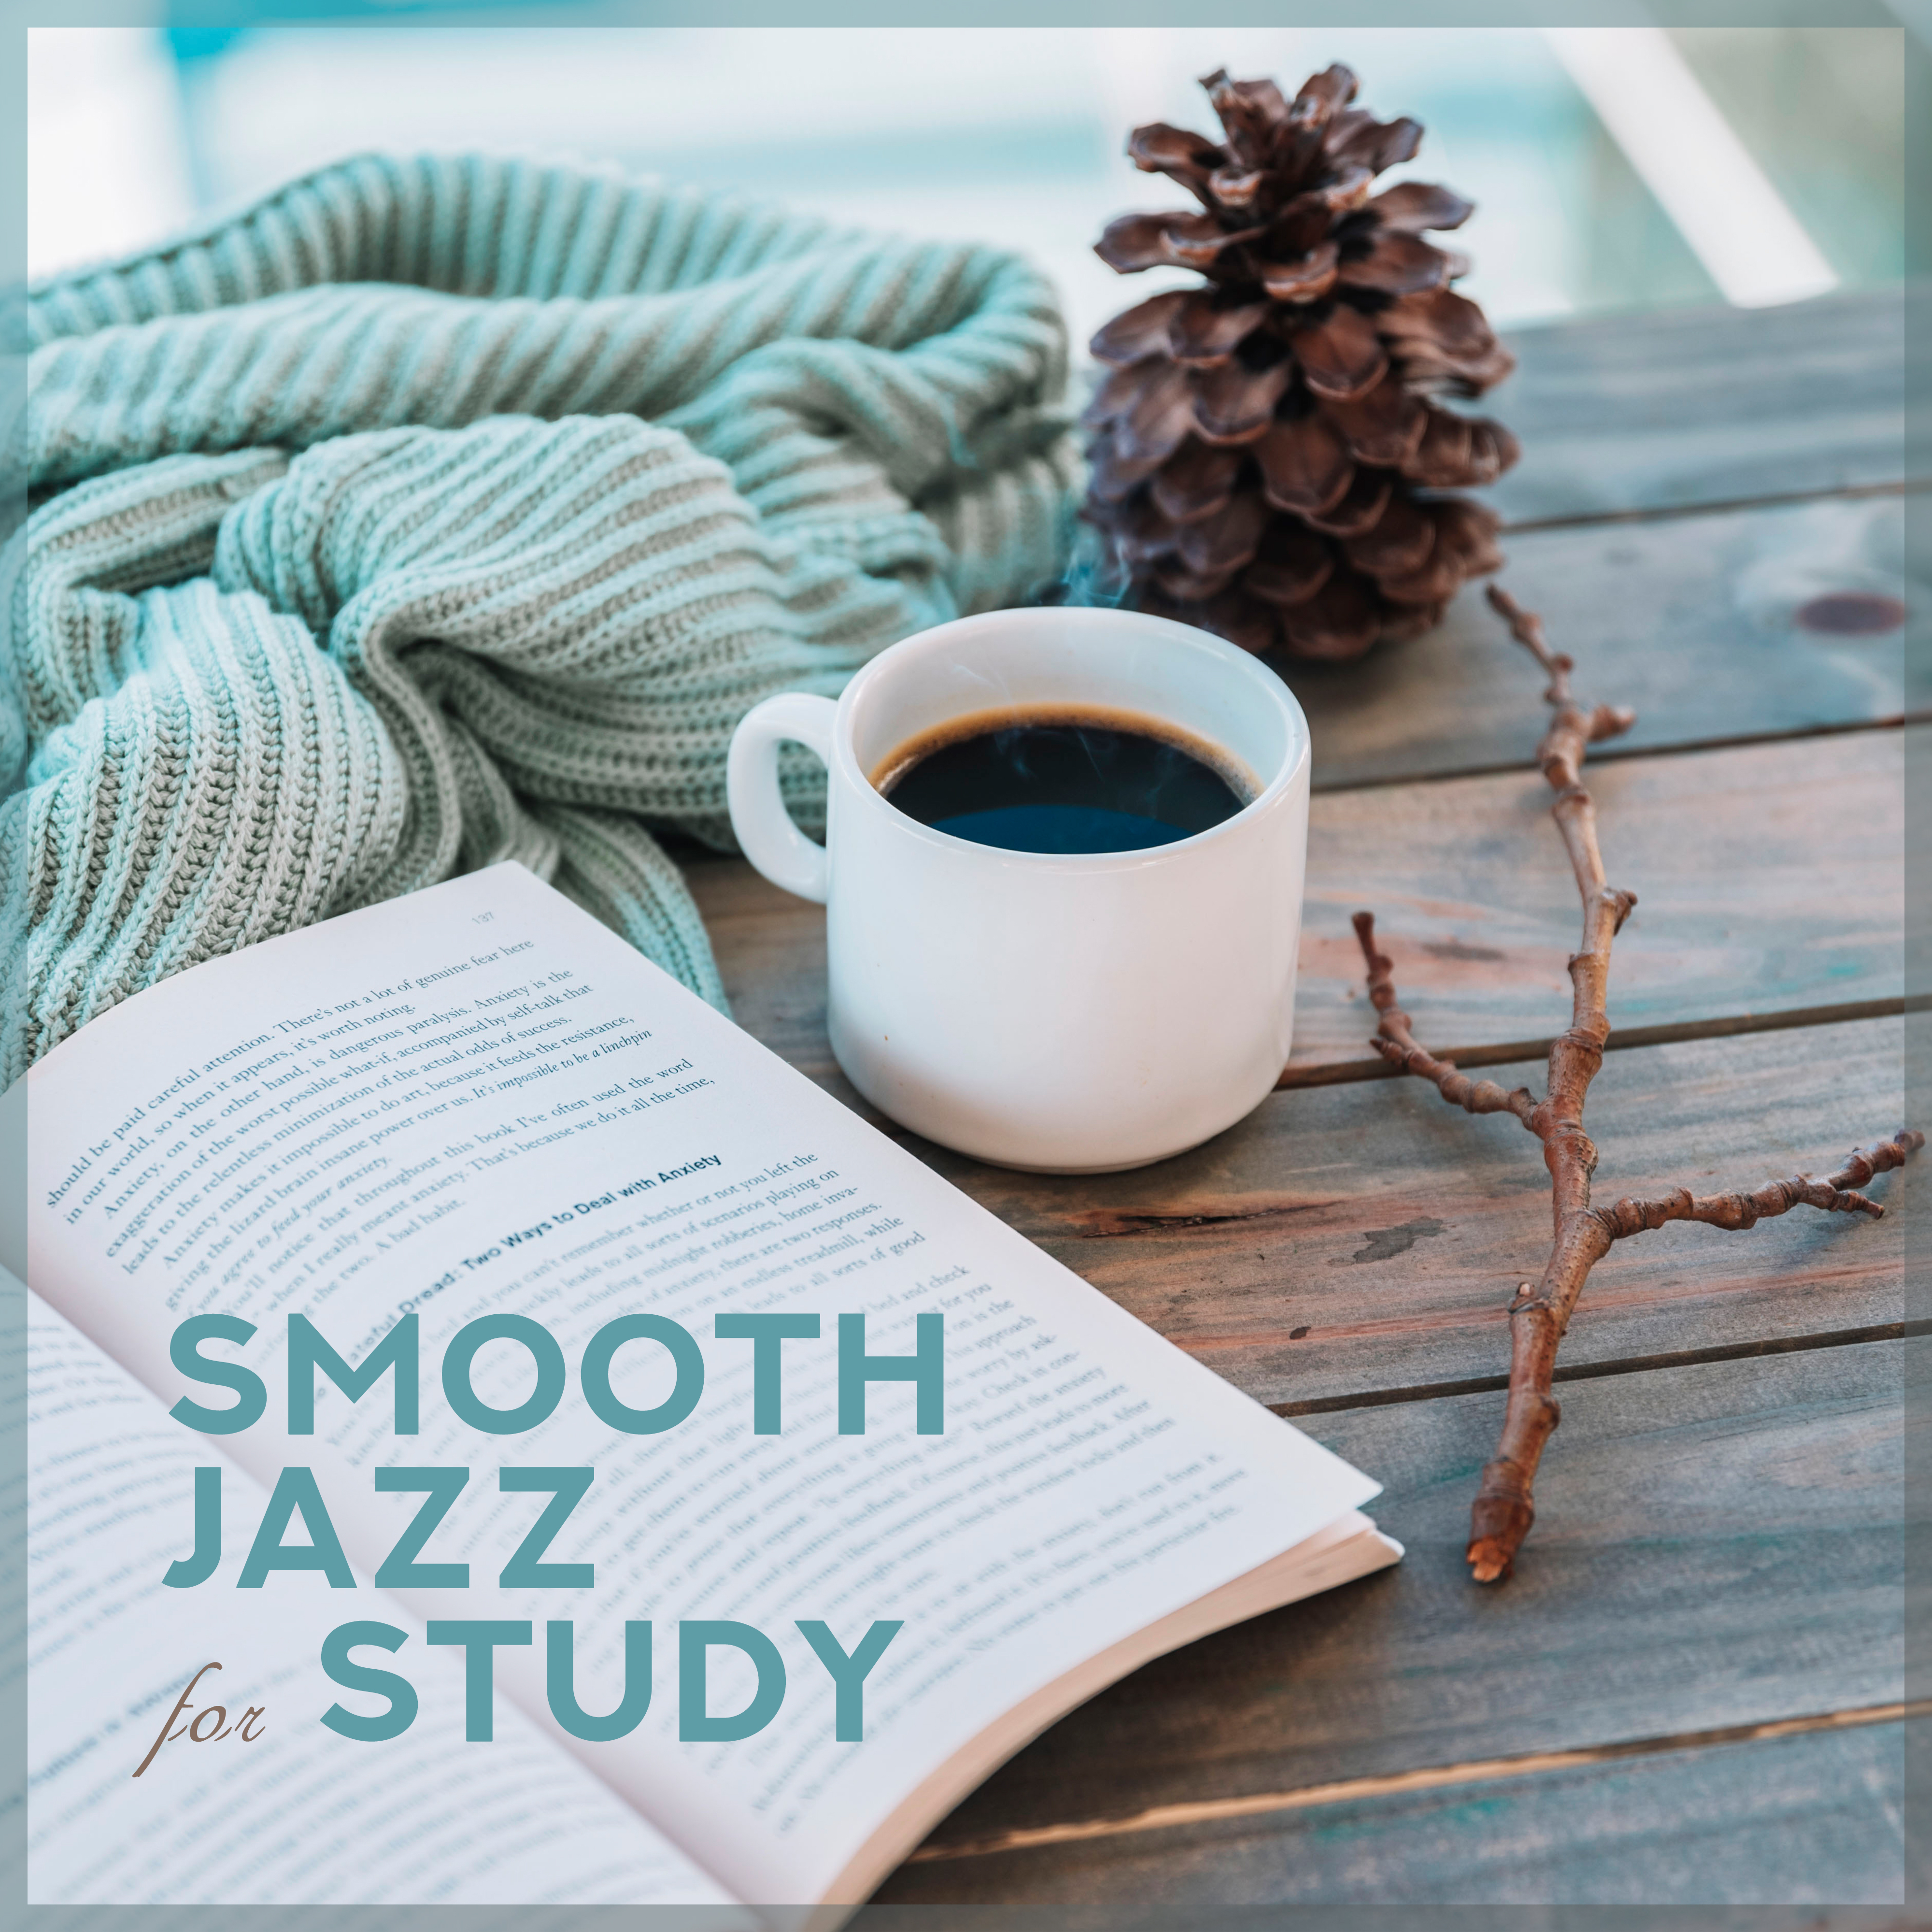 Smooth Jazz for Study  Instrumental Music for Work, Relaxation, Best Classical Jazz, Full Concentration, Antistress Music, Jazz Lounge